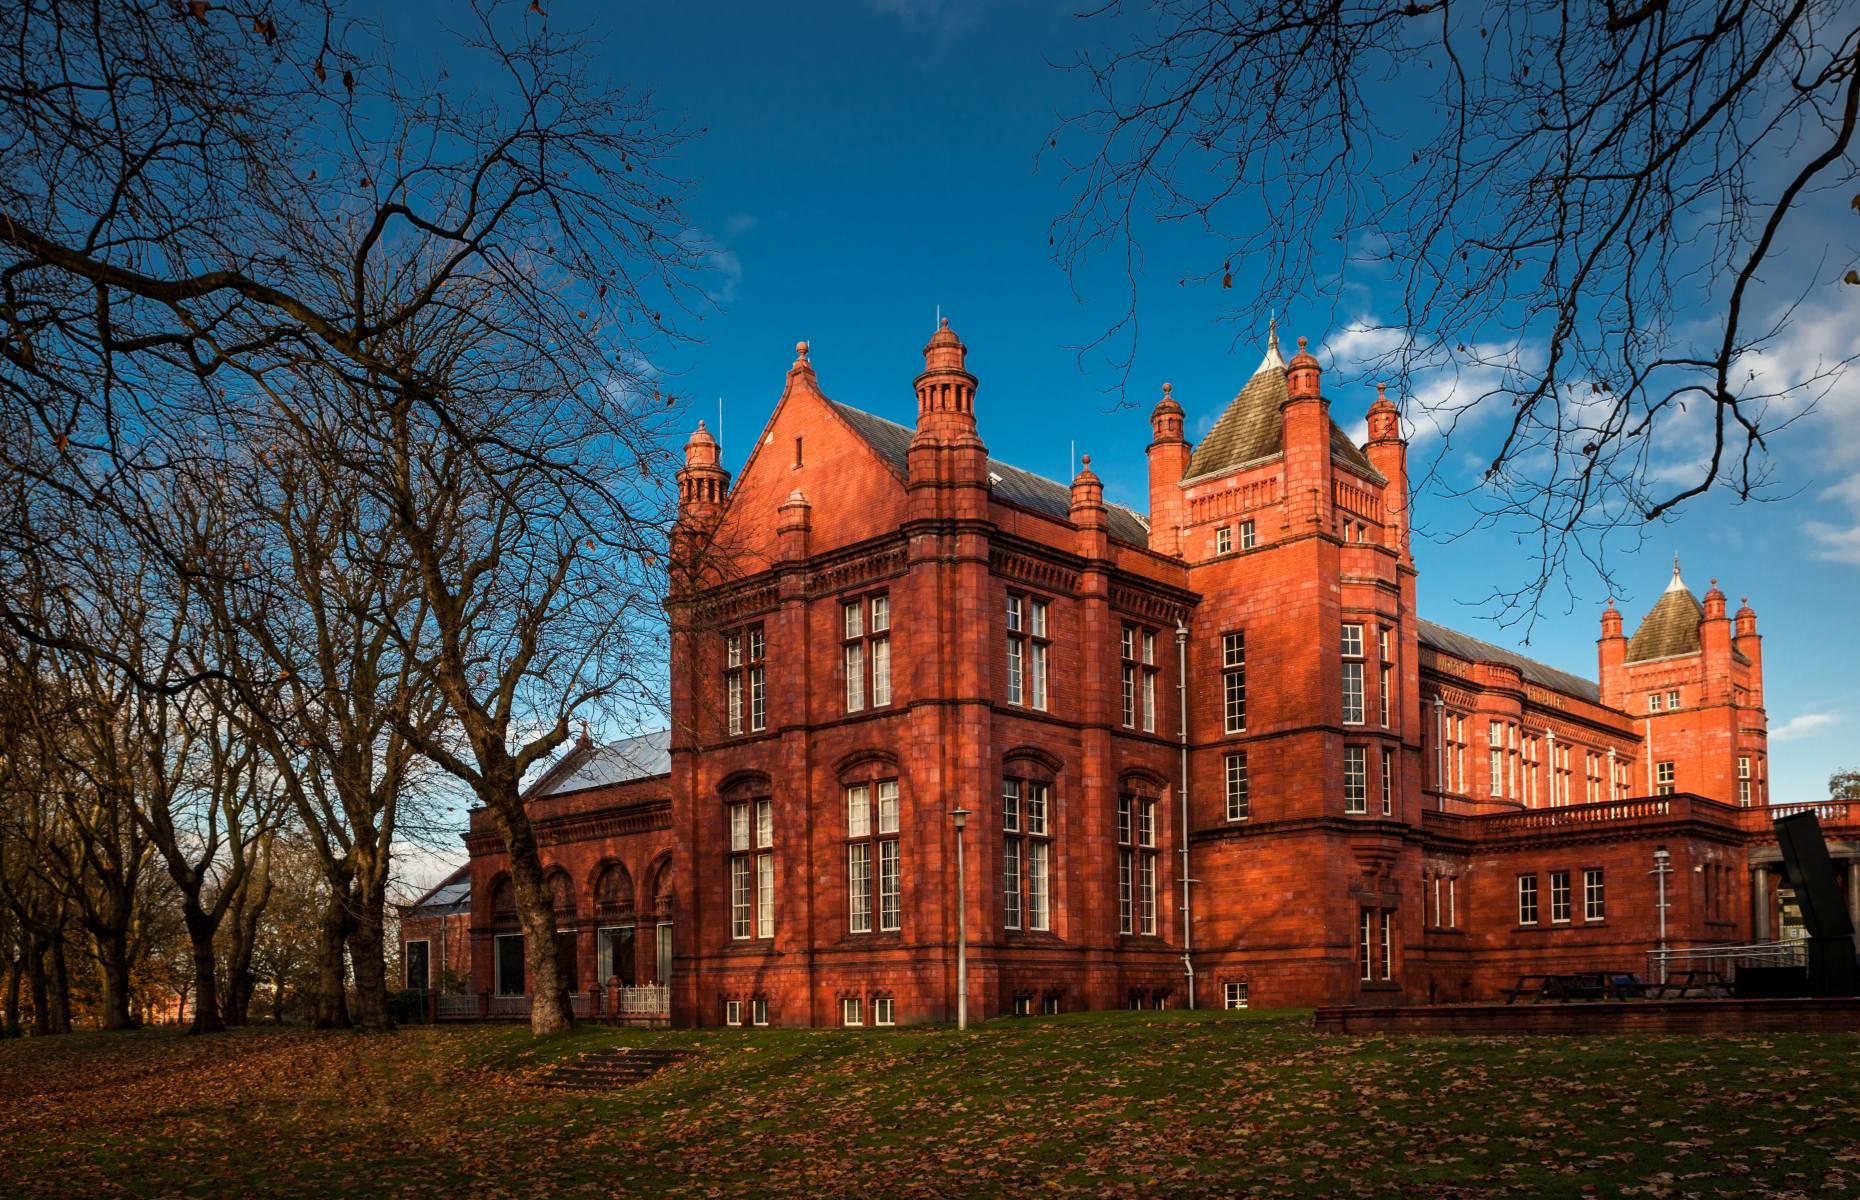 <p>Nestled within gorgeous parkland, <a href="https://www.loveexploring.com/news/72574/things-to-do-in-manchester">Manchester</a>’s Whitworth Art Gallery was the first English gallery in a park when it was founded in 1889. Since then, the Whitworth, which now forms part of the University of Manchester, underwent a £15 million ($20m) redevelopment in 2015. The award-winning extension not only doubled the exhibition space but also seamlessly integrated the gallery with the surrounding landscape while retaining the best of the historic building. The peaceful art garden, pretty sculpture terrace and café at treetop level make the Whitworth a city favourite.</p>